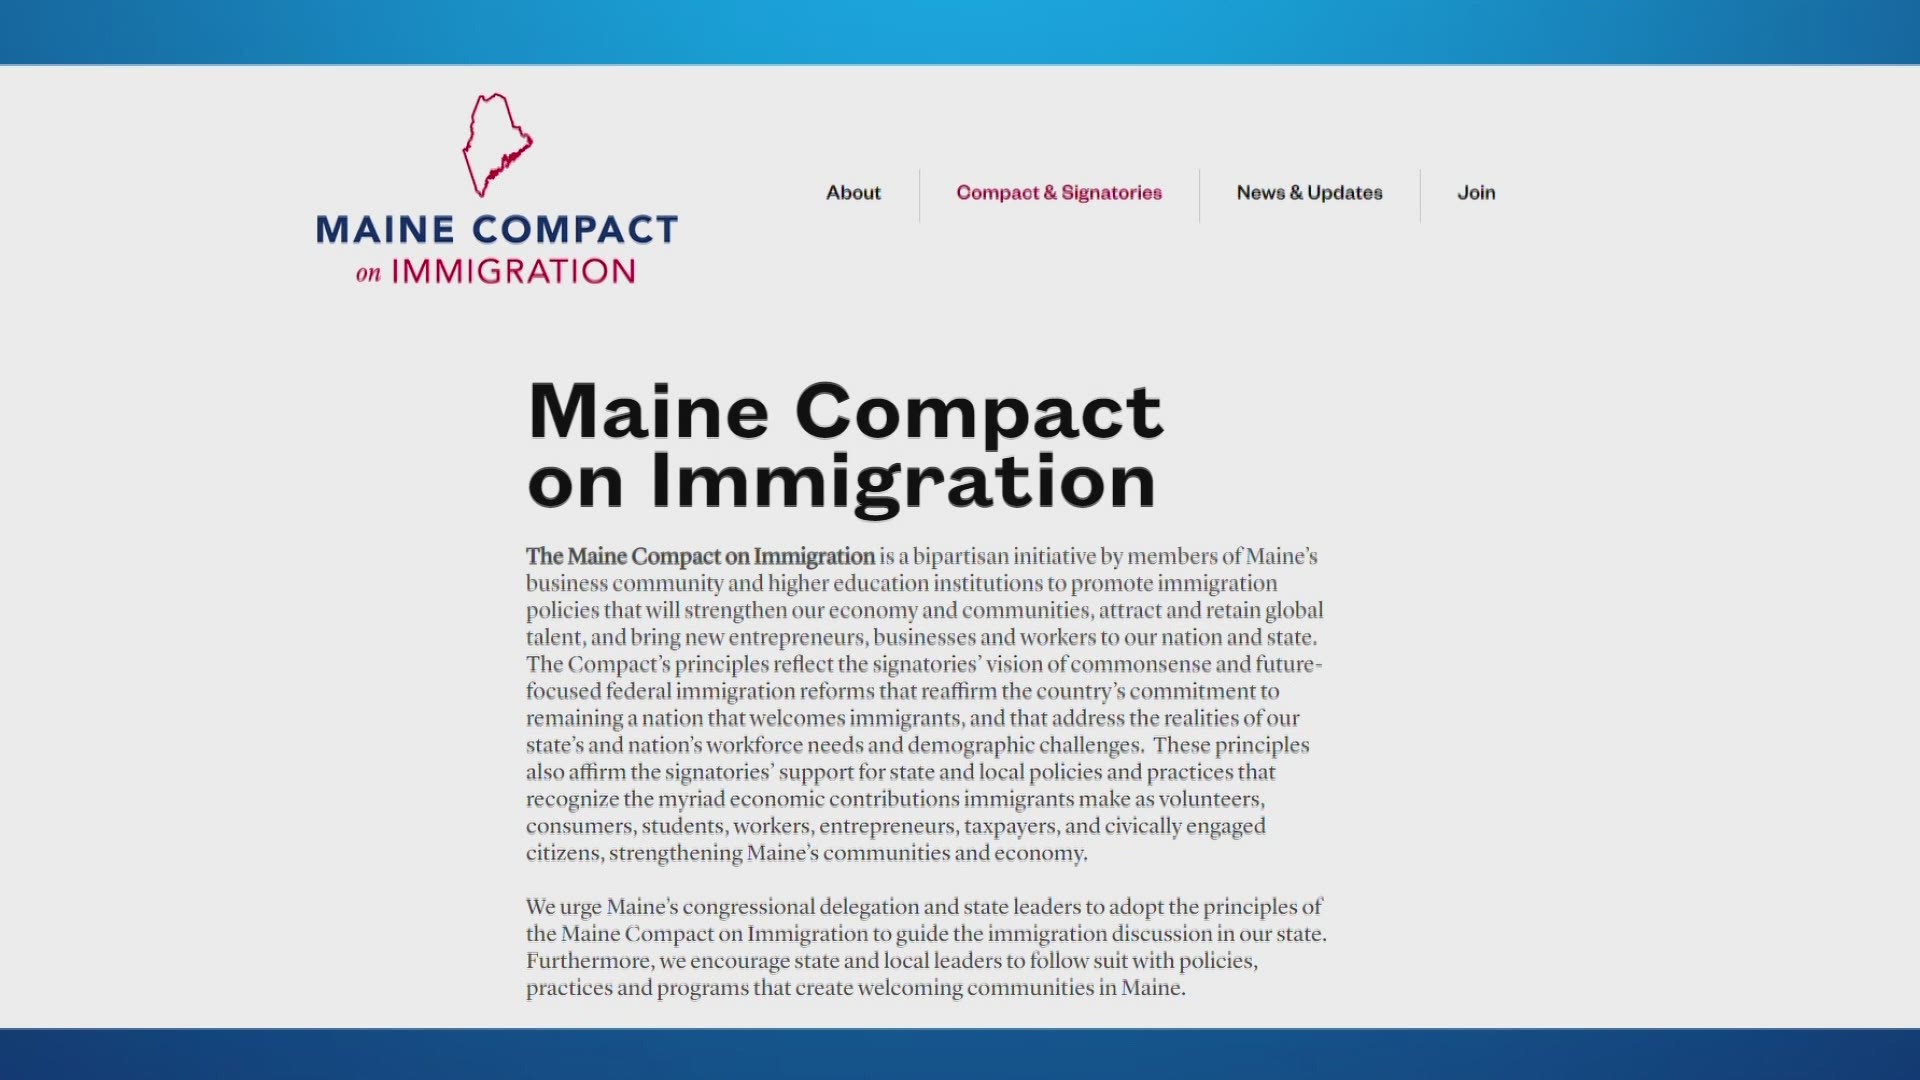 Maine Business and higher education leaders are advocating for pro-immigration policy reform through a new "Maine compact on immigration.